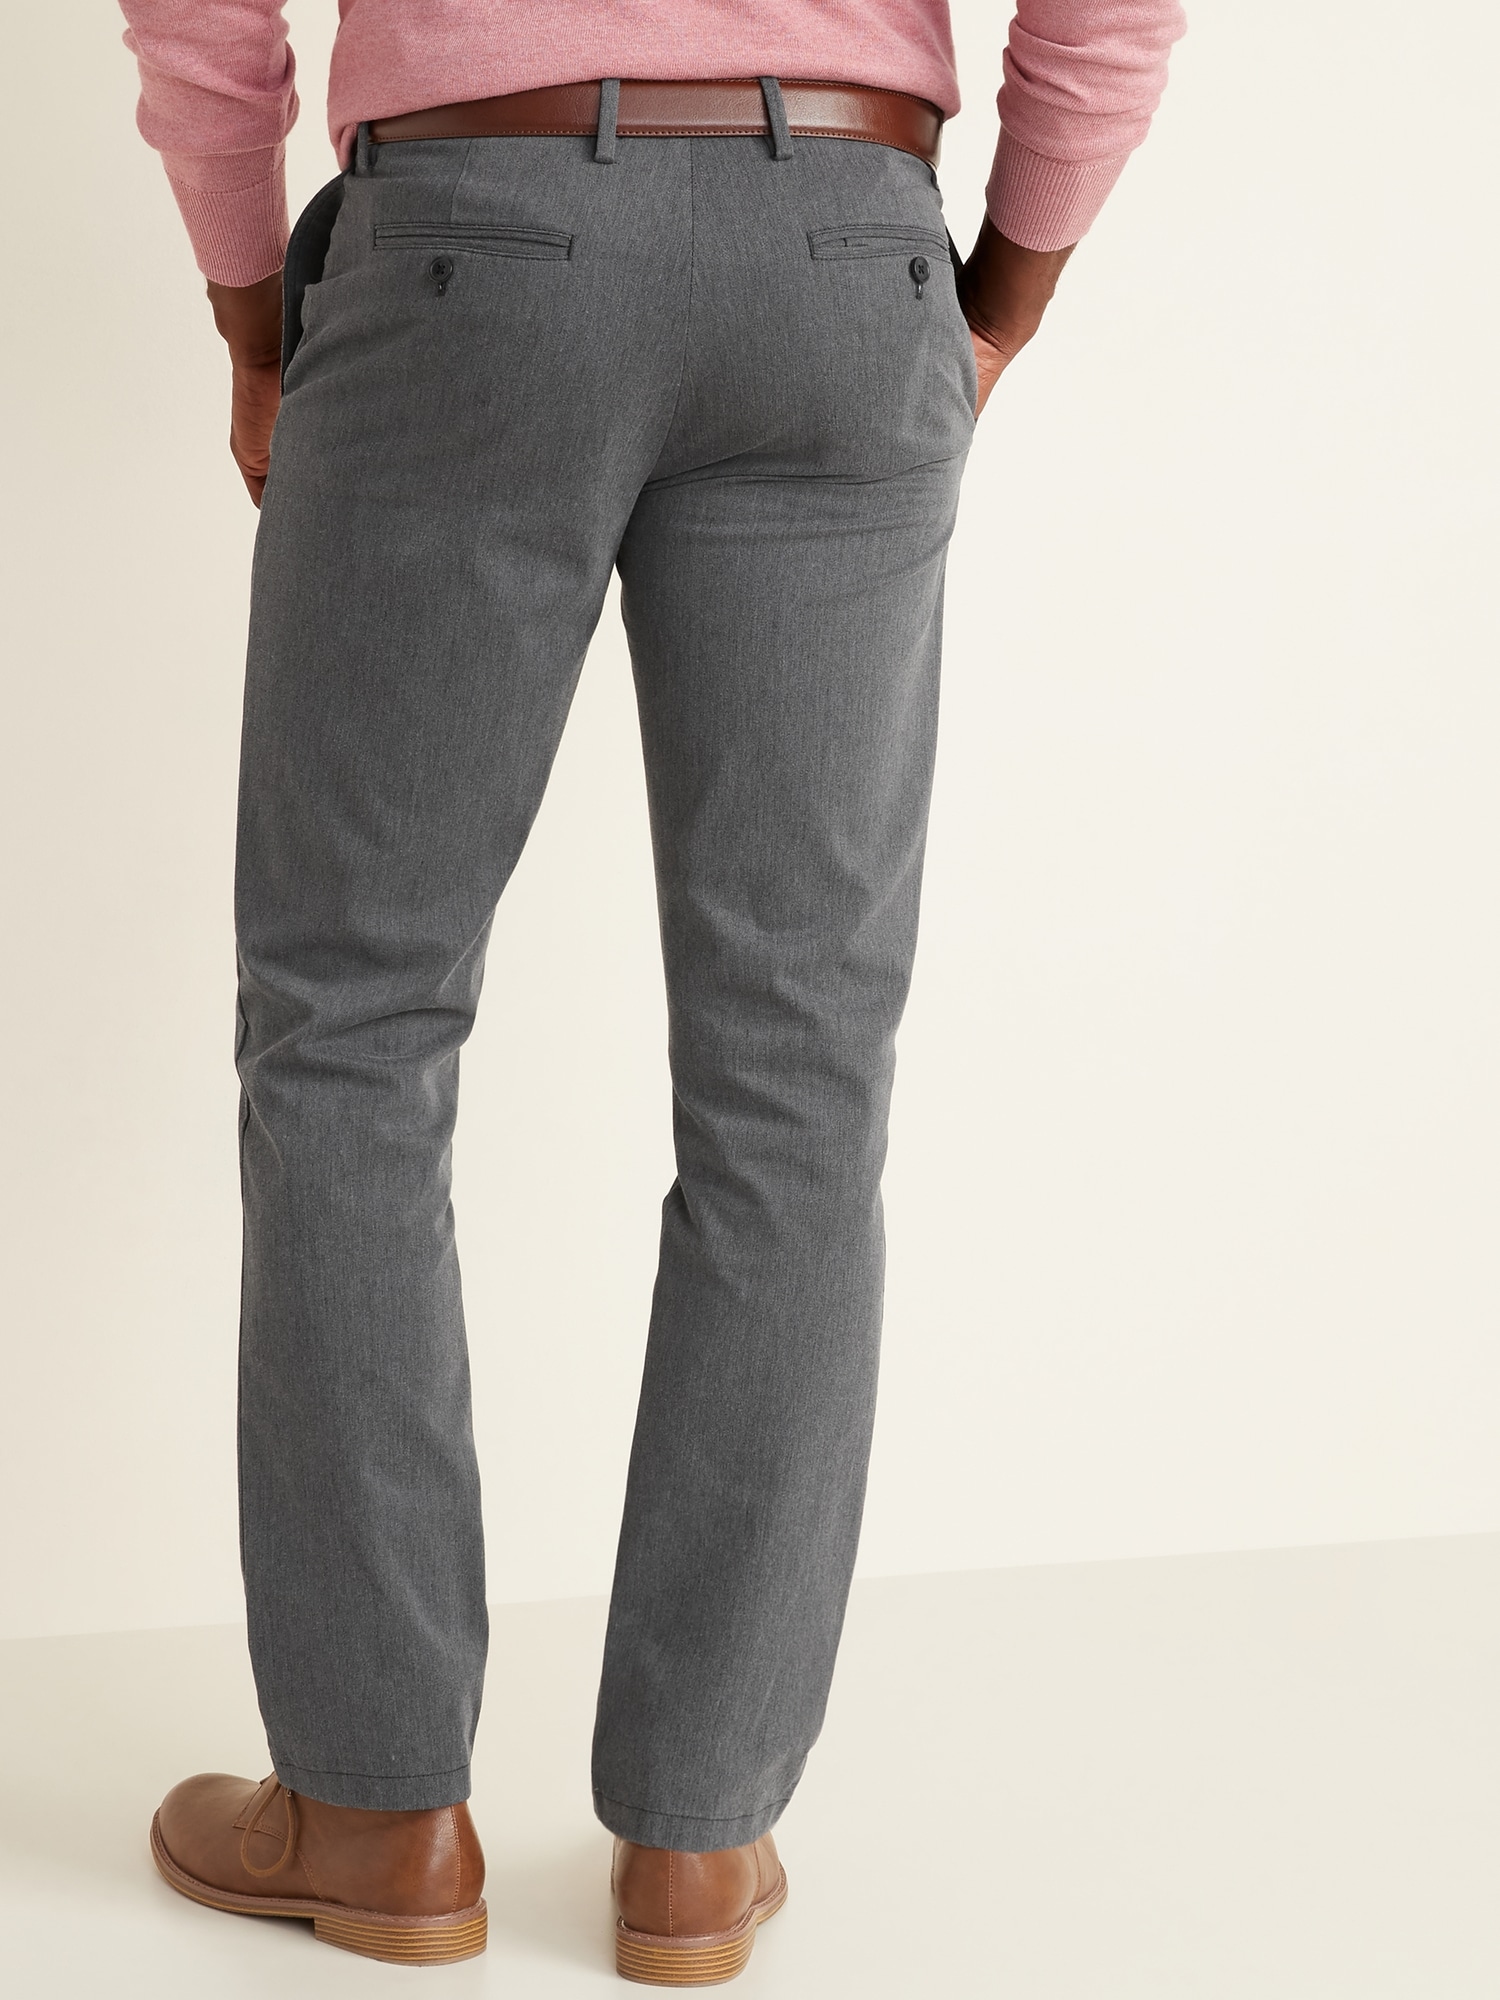 Slim Ultimate Built-In Flex Textured Chino Pants for Men | Old Navy